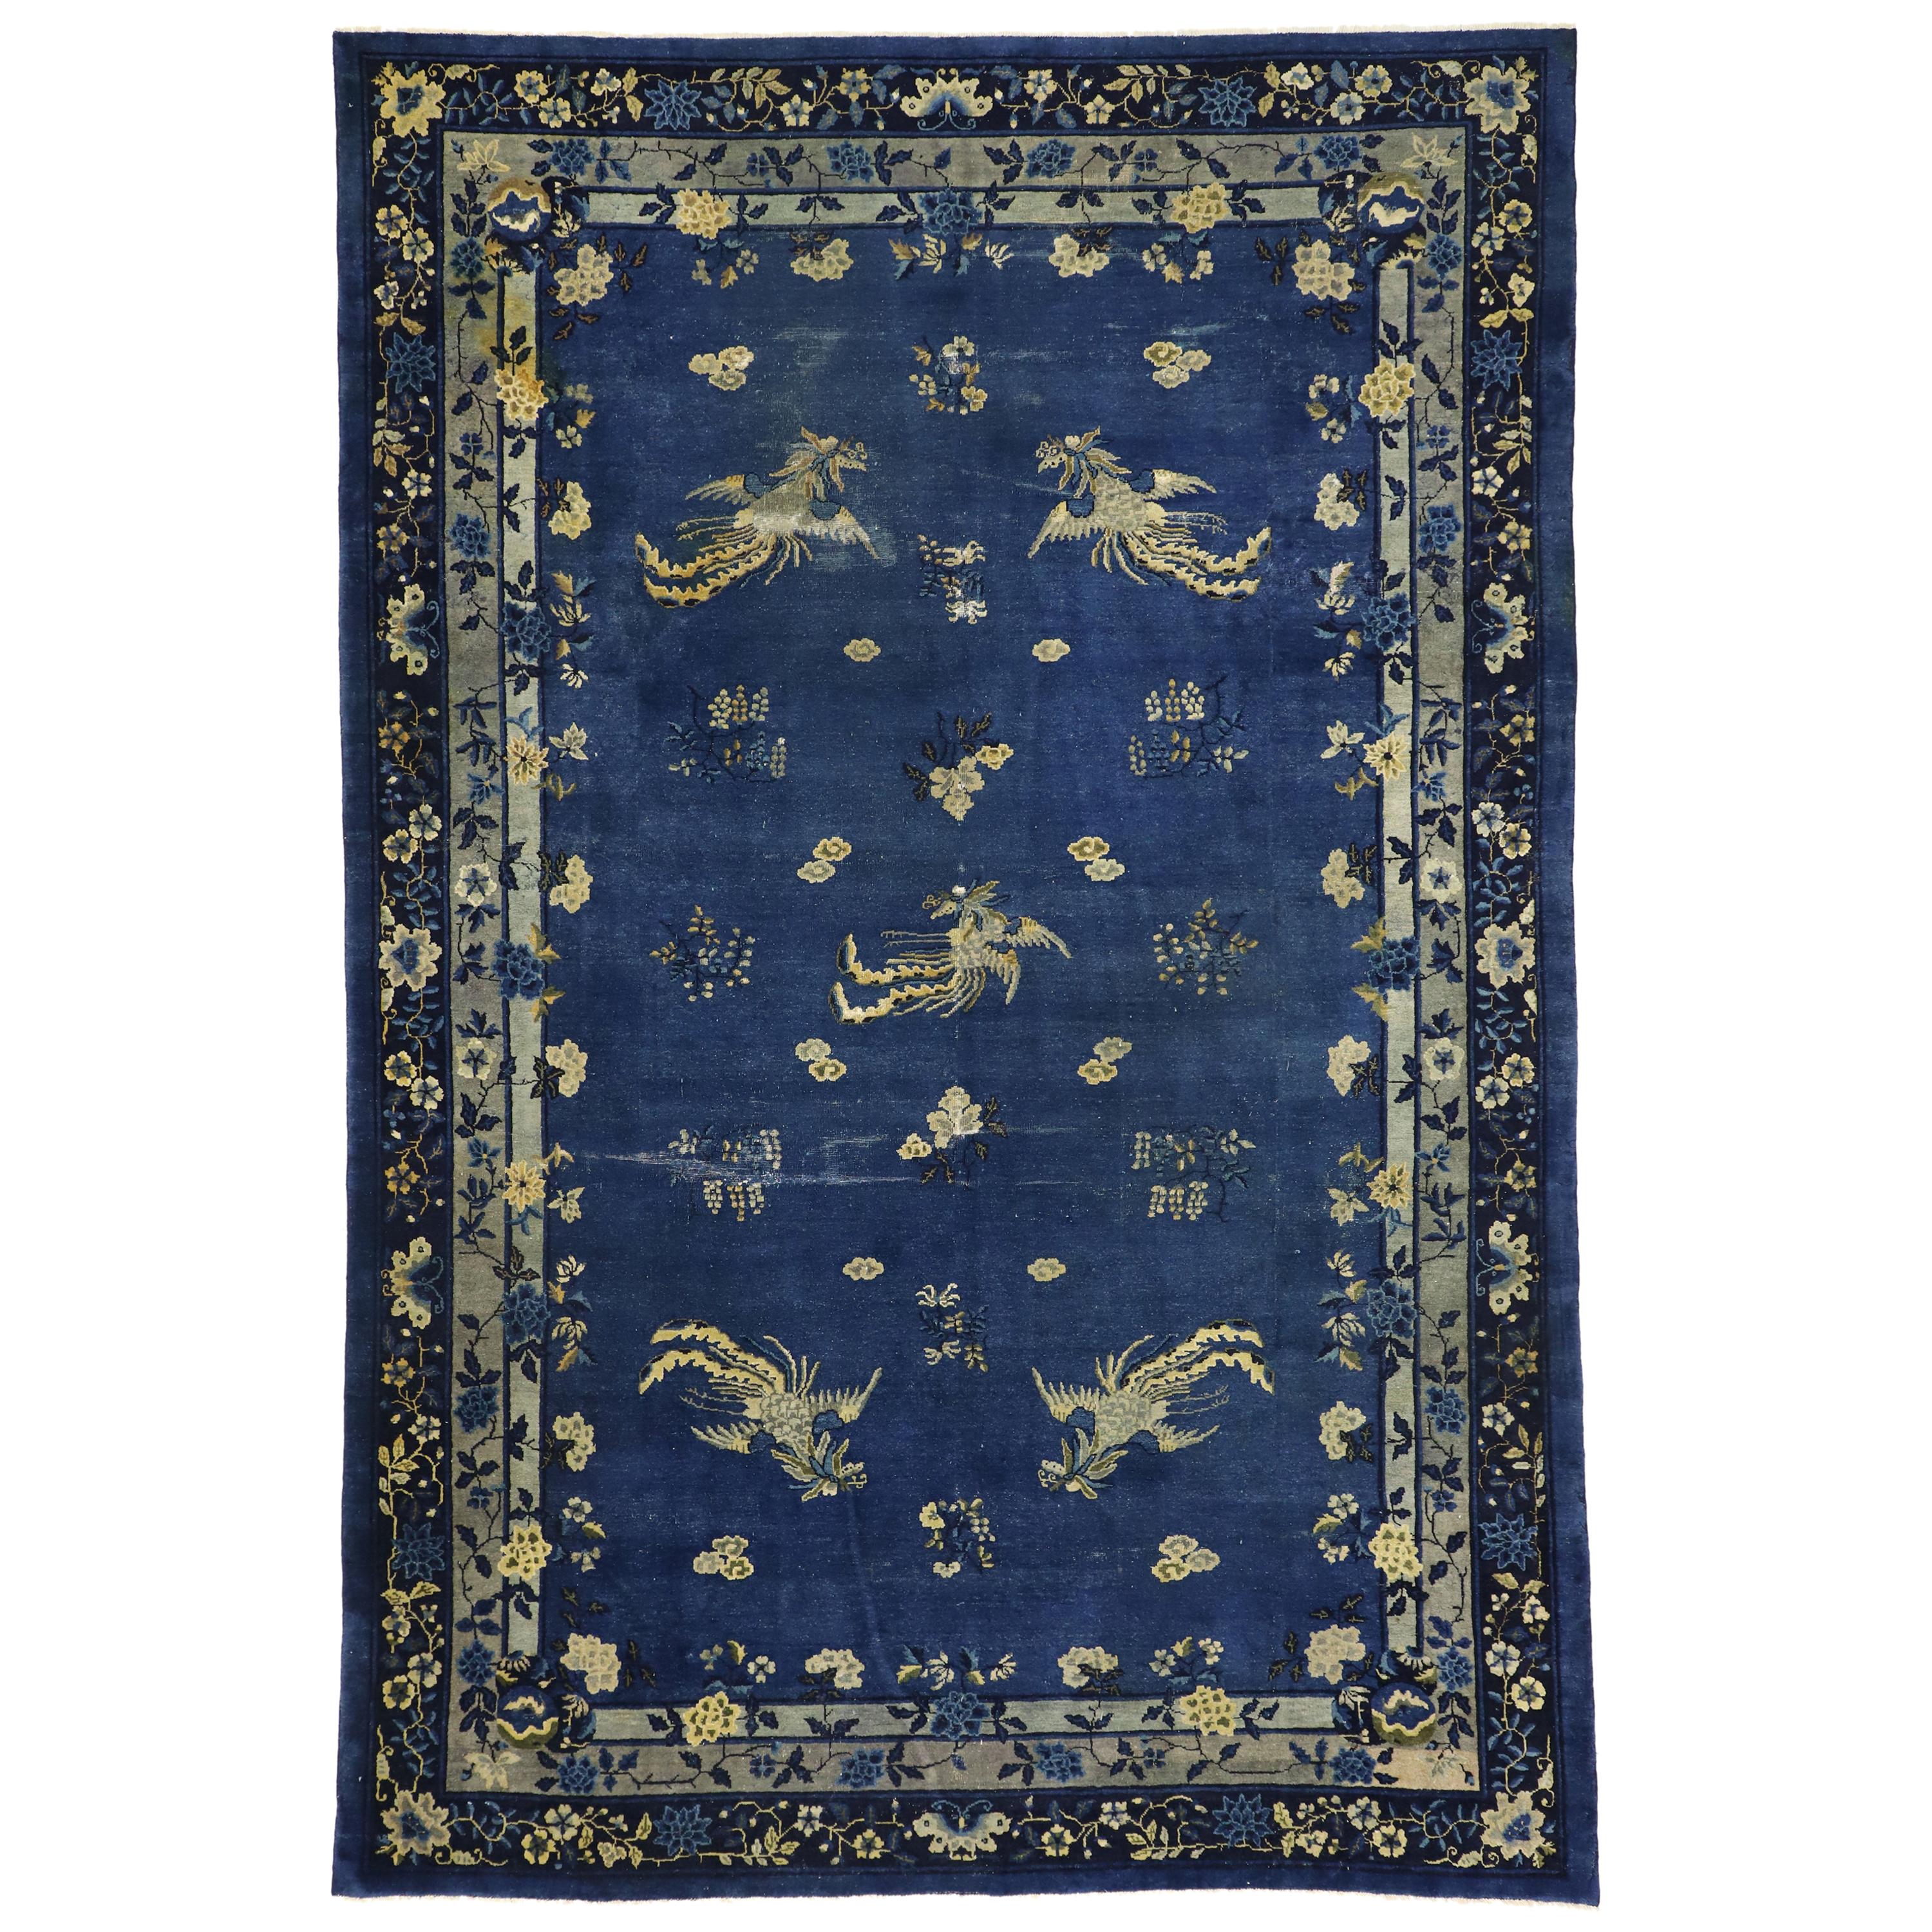 Distressed Antique Chinese Peking Rug with Traditional Chinoiserie Style